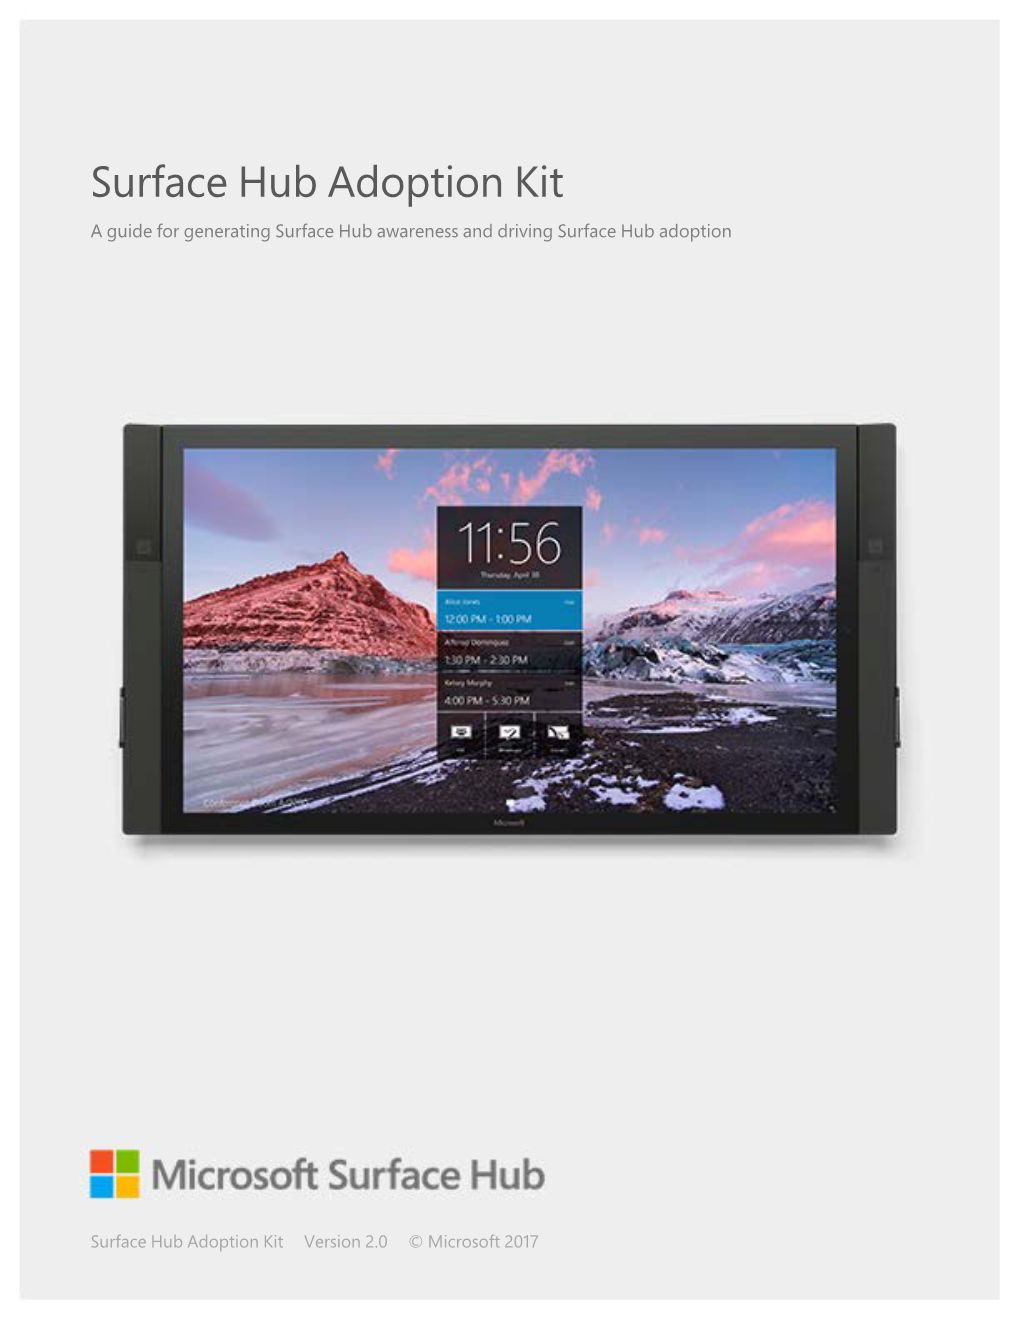 Surface Hub Adoption Kit a Guide for Generating Surface Hub Awareness and Driving Surface Hub Adoption